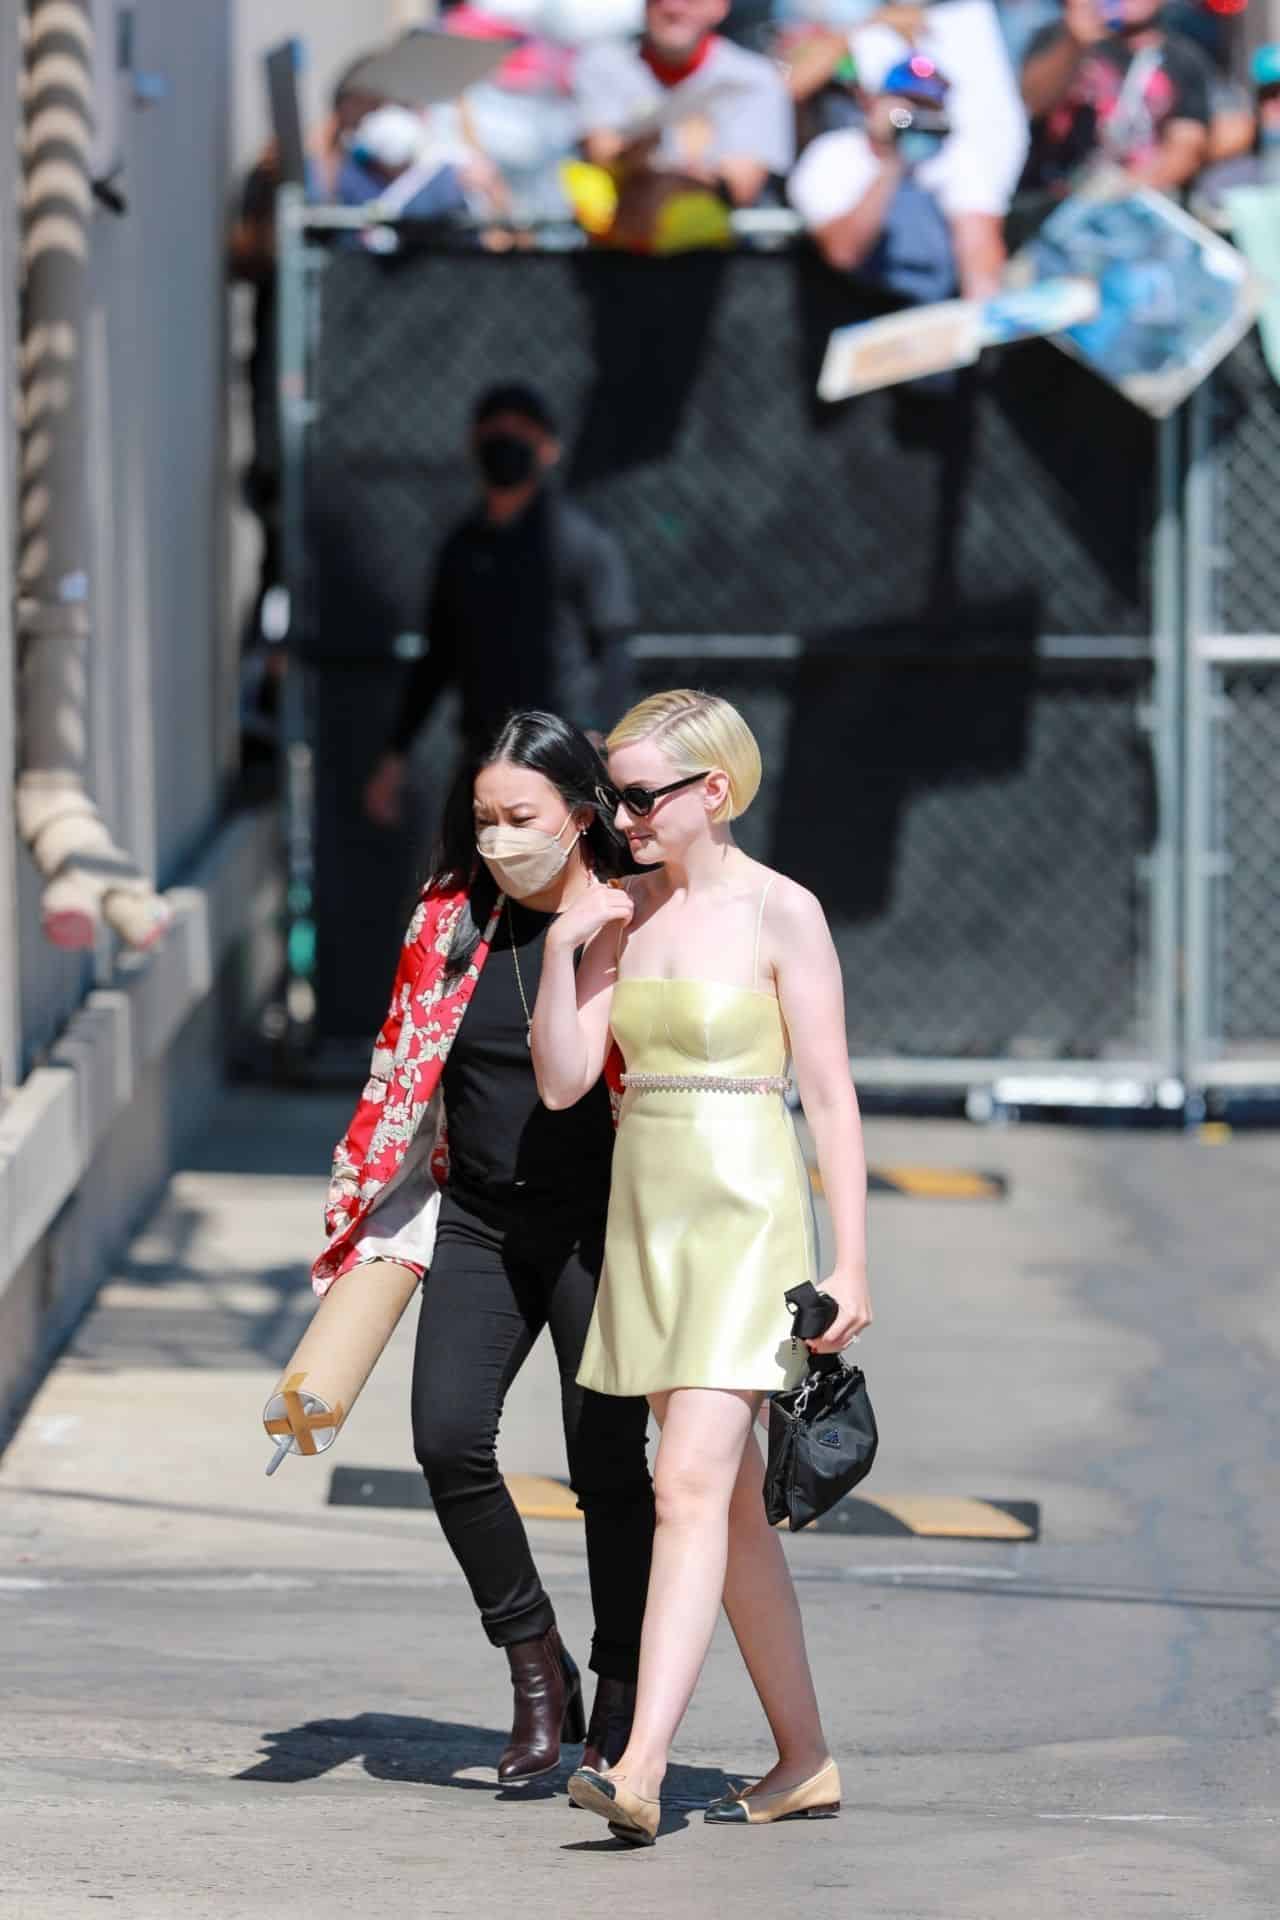 Julia Garner in a Gold Dress Arriving at the Jimmy Kimmel Show in Hollywood